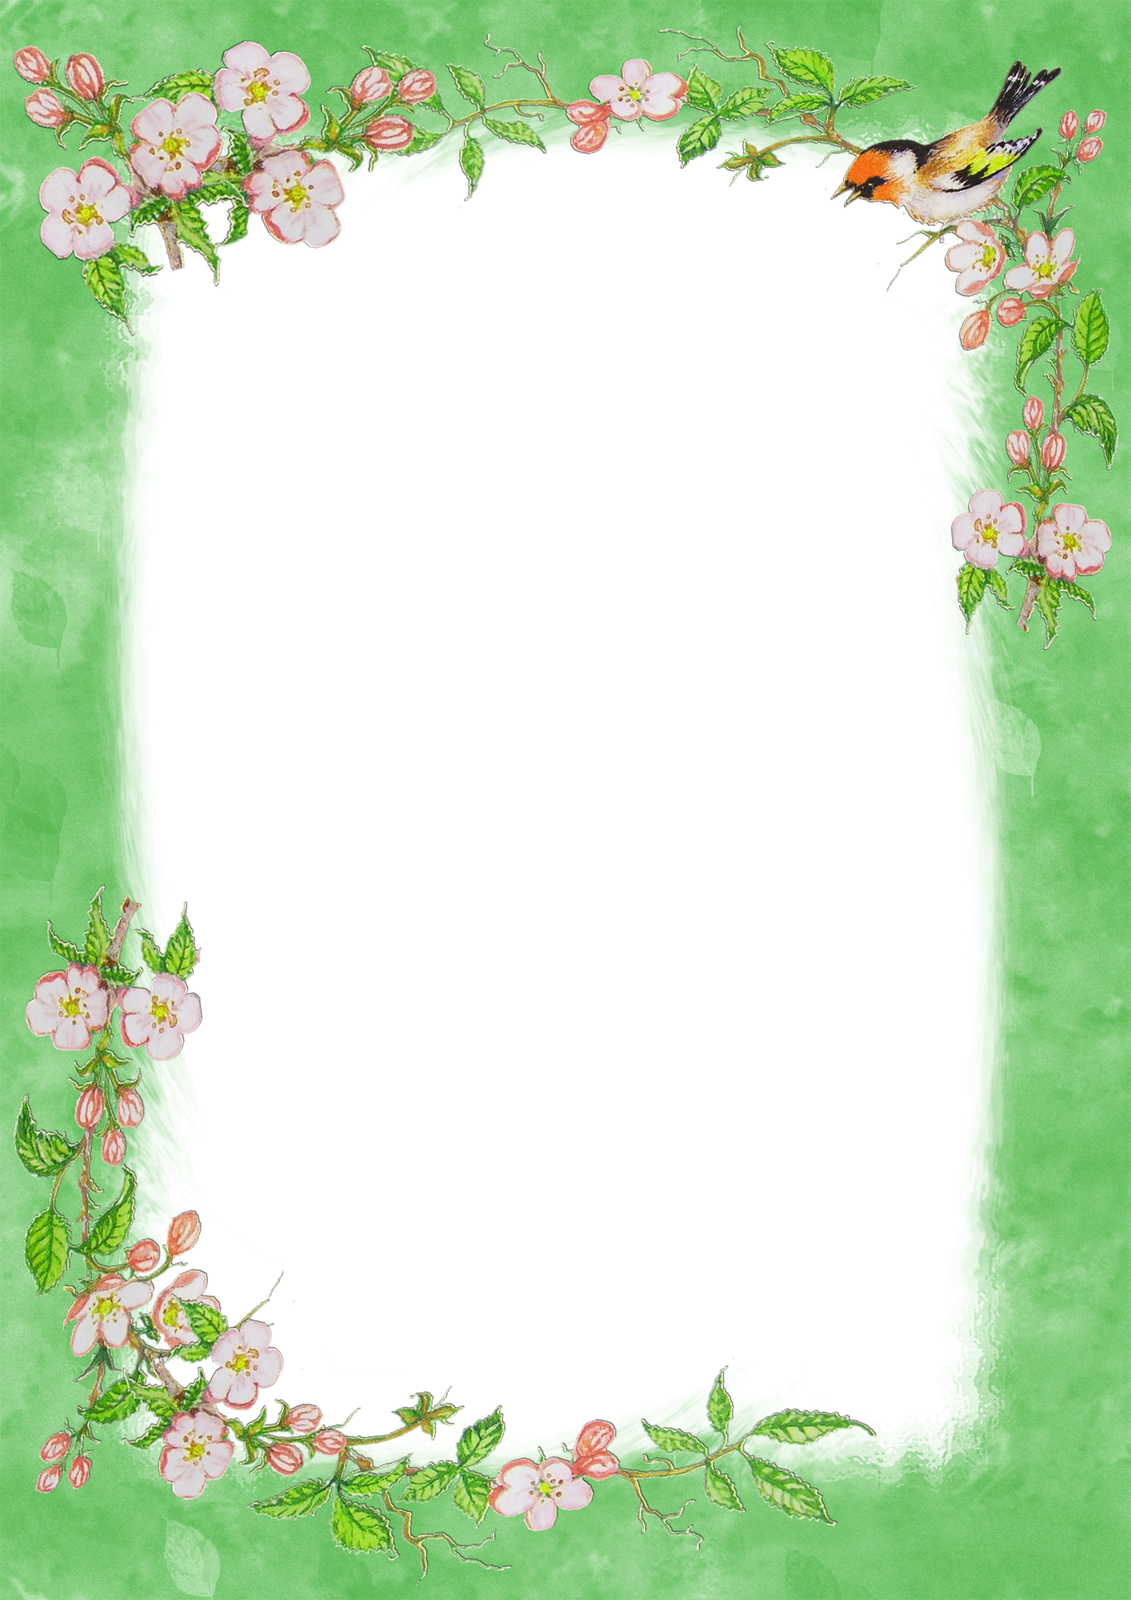 Daffodil clipart frame, Daffodil frame Transparent FREE for download on